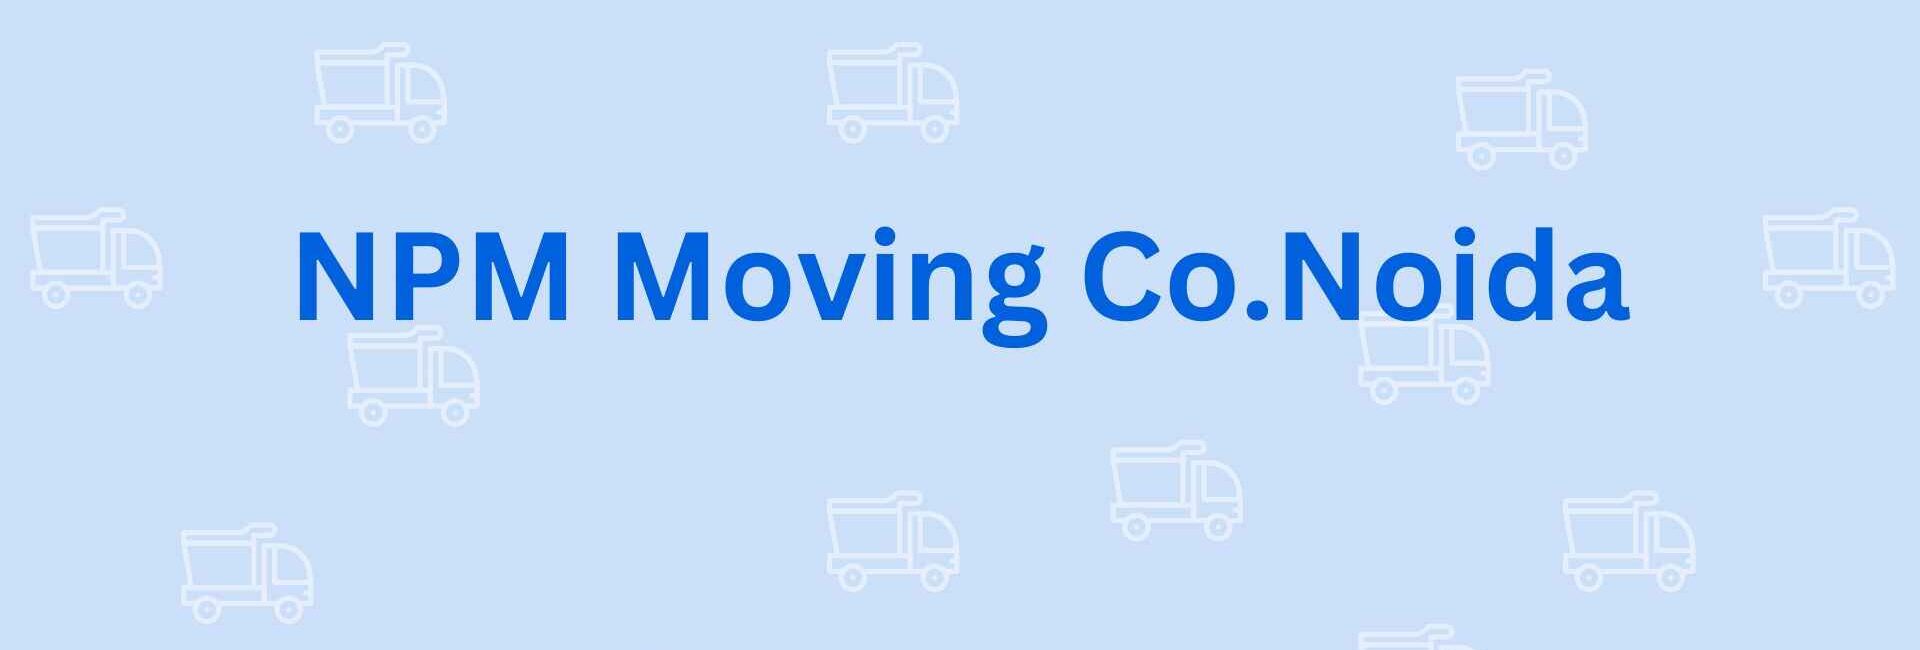 NPM Moving Co.Noida - Packers and Movers in Noida